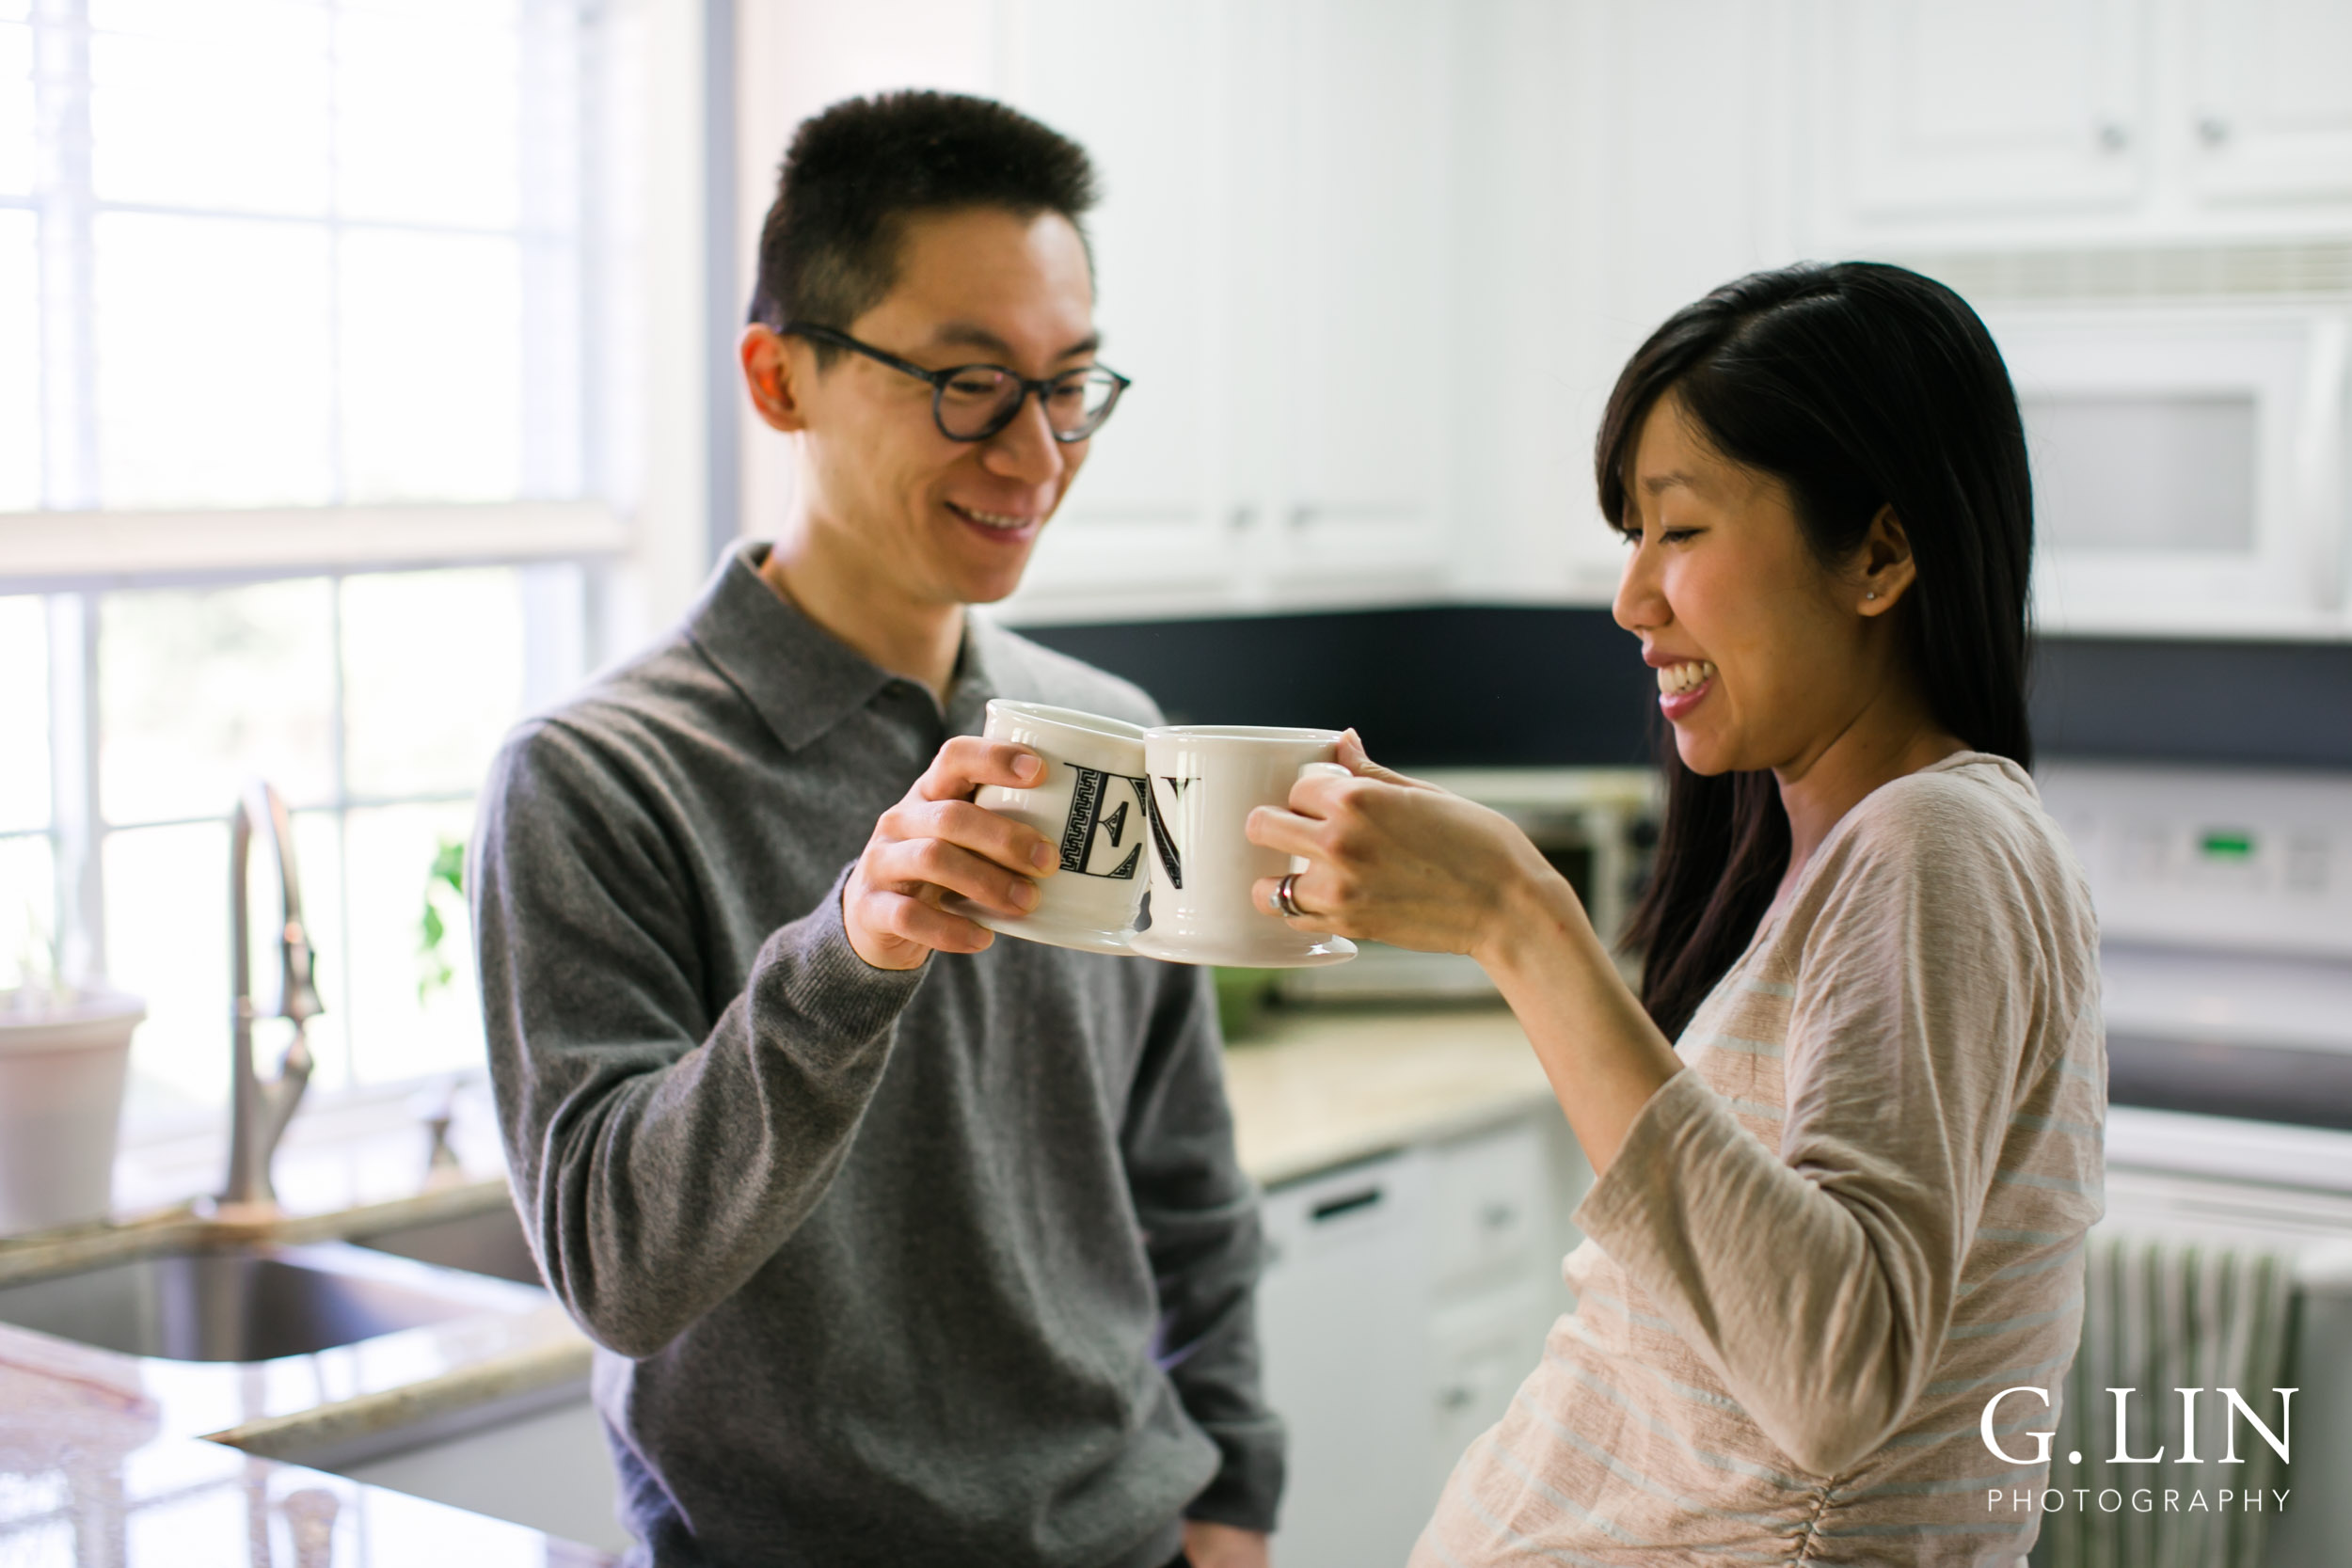 Durham Maternity Photography | G. Lin Photography | Couple drinking from mugs in kitchen